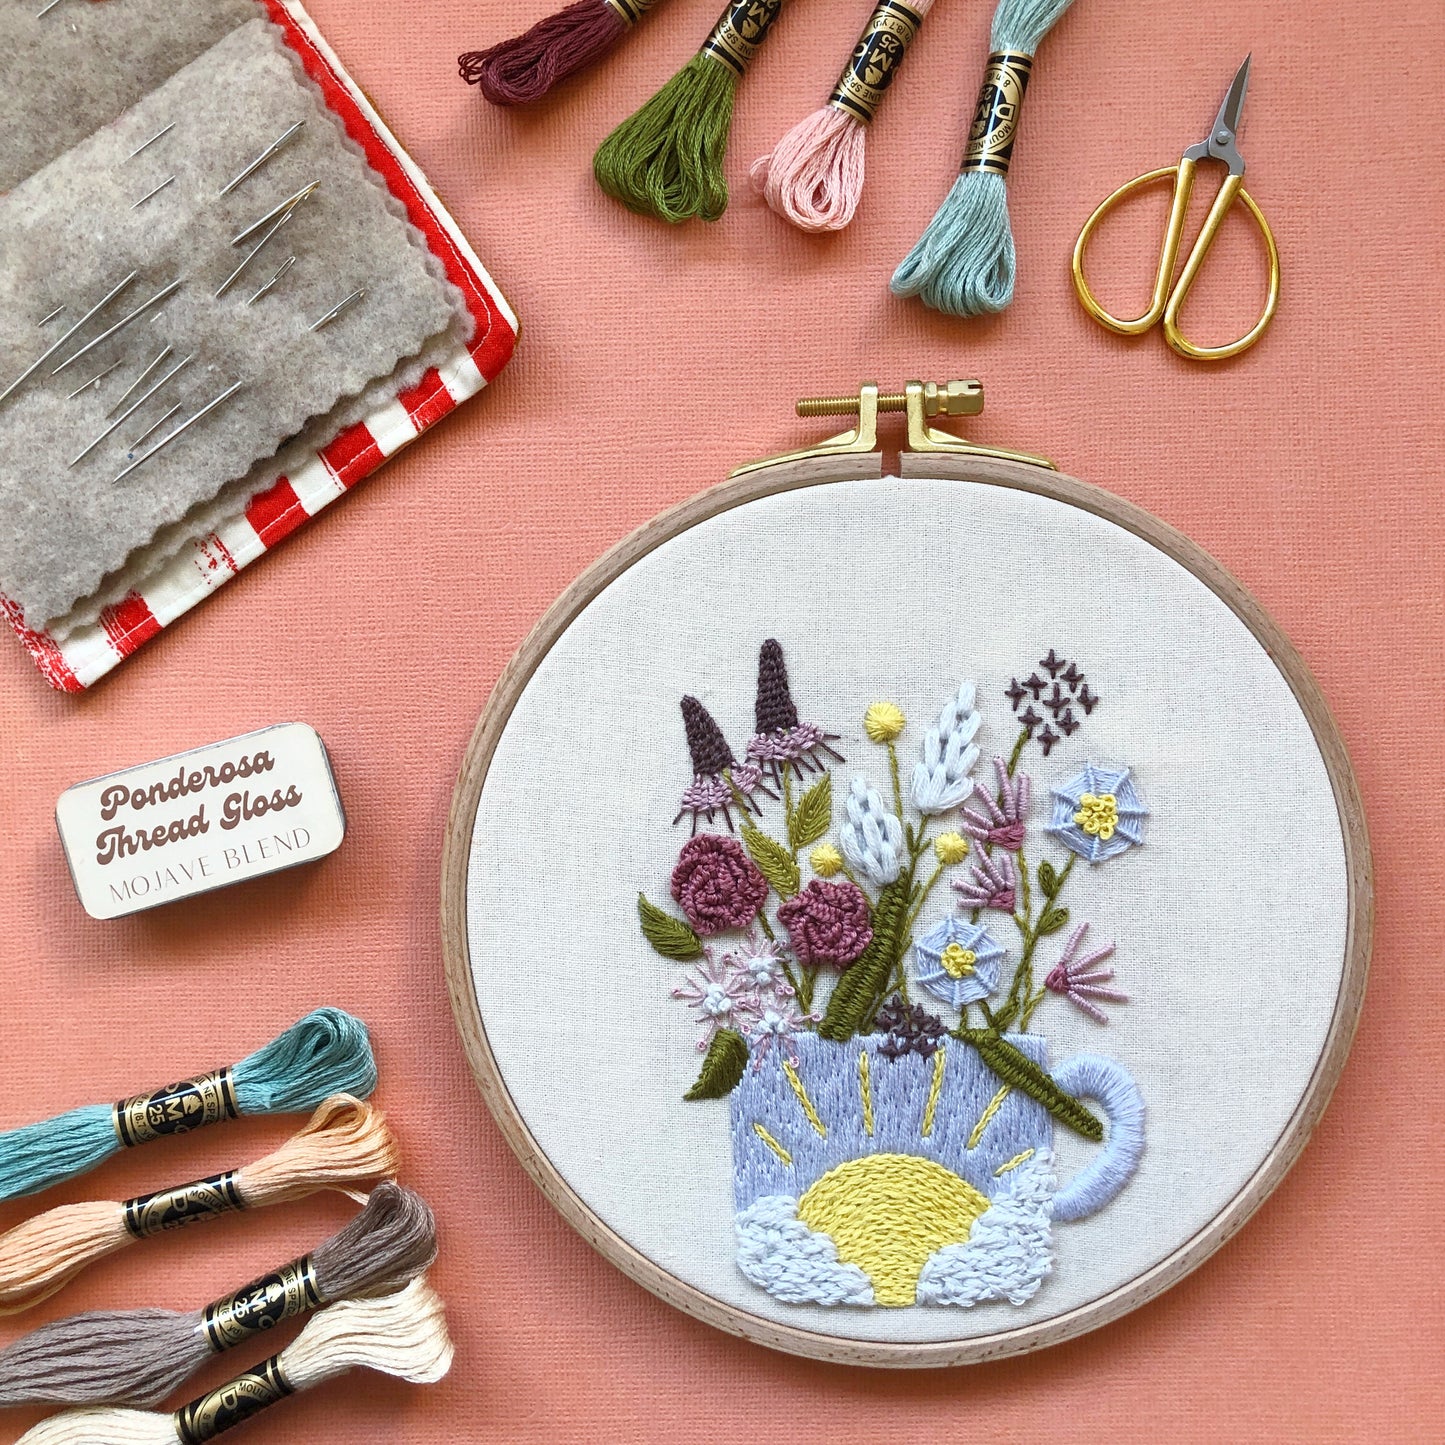 Cup of Cheer - Advanced 3D Hand Embroidery DIY Craft Kit